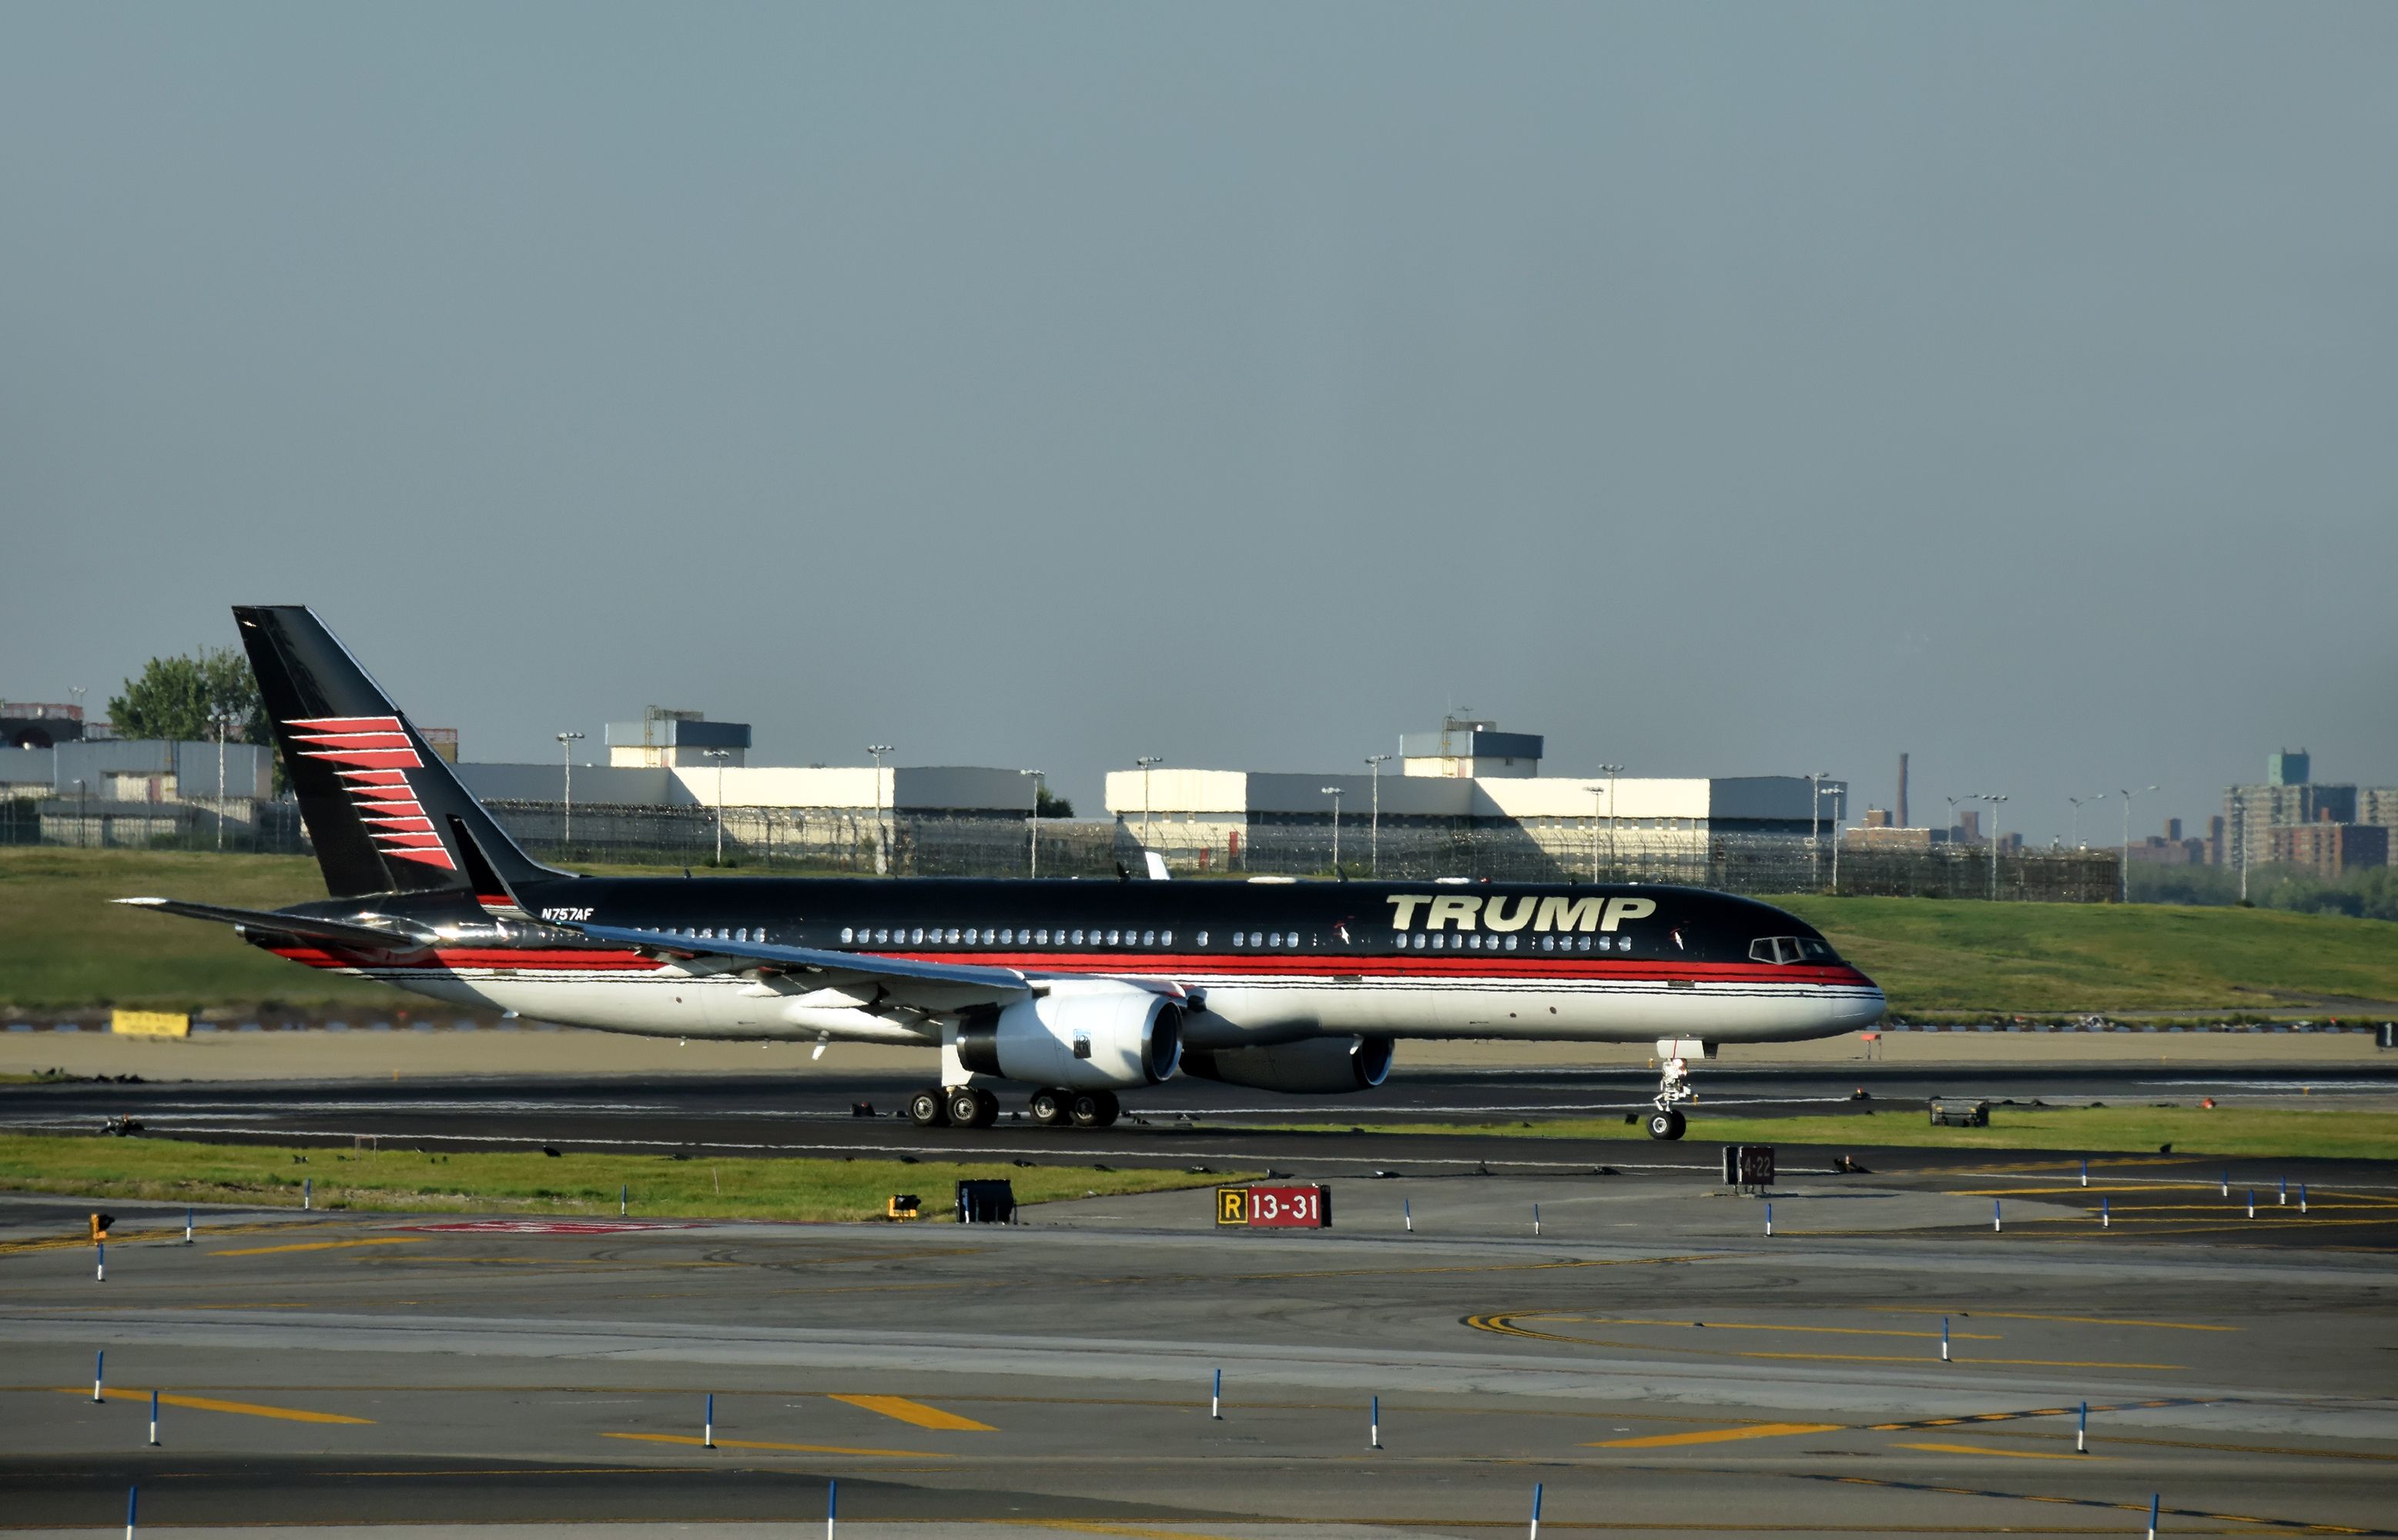 Boeing 757 jet airplane bearing the logo of Donald Trump takes off from laguardia, New York City